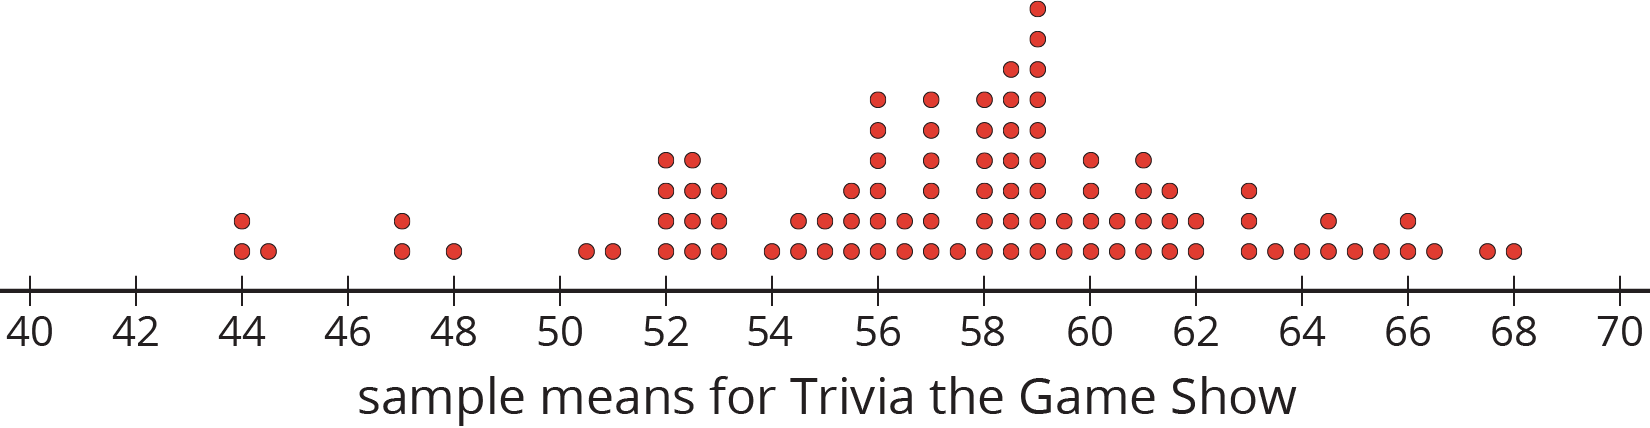 A dot plot for “sample means for Trivia the Game Show” with the numbers 40 through 70, in increments of 2, is indicated. The data are as follows:  44 years old, 2 dots. 44 point 5 years old, 1 dot. 47 years old, 2 dots. 48 years old, 1 dot. 50 point 5 years old, 1 dot. 51 years old, 1 dot. 52 years old, 4 dots. 52 point 5 years old, 4 dots. 53 years old, 3 dots. 54 years old, 1 dot. 54 point 5 years old, 2 dots. 55 years old, 2 dots. 55 point 5 years old, 3 dots. 56 years old, 6 dots. 56 point 5 years old, 2 dots. 57 years old, 6 dots. 57 point 5 years old, 1 dot. 58 years old, 6 dots. 58 point 5 years old, 7 dots. 59 years old, 9 dots. 59 point 5 years old, 2 dots. 60 years old, 4 dots. 60 point 5 years old, 2 dots. 61 years old, 4 dots. 61 point 5 years old, 3 dots. 62 years old, 2 dots. 63 years old, 3 dots. 63 point 5 years old, 1 dot. 64 years old, 1 dot. 64 point 5 years old, 2 dots. 65 years old, 1 dot. 65 point 5 years old, 1 dot. 66 years old, 2 dots. 66 point 5 years old, 1 dot. 67 point 5 years old, 1 dot. 68 years old, 1 dot.